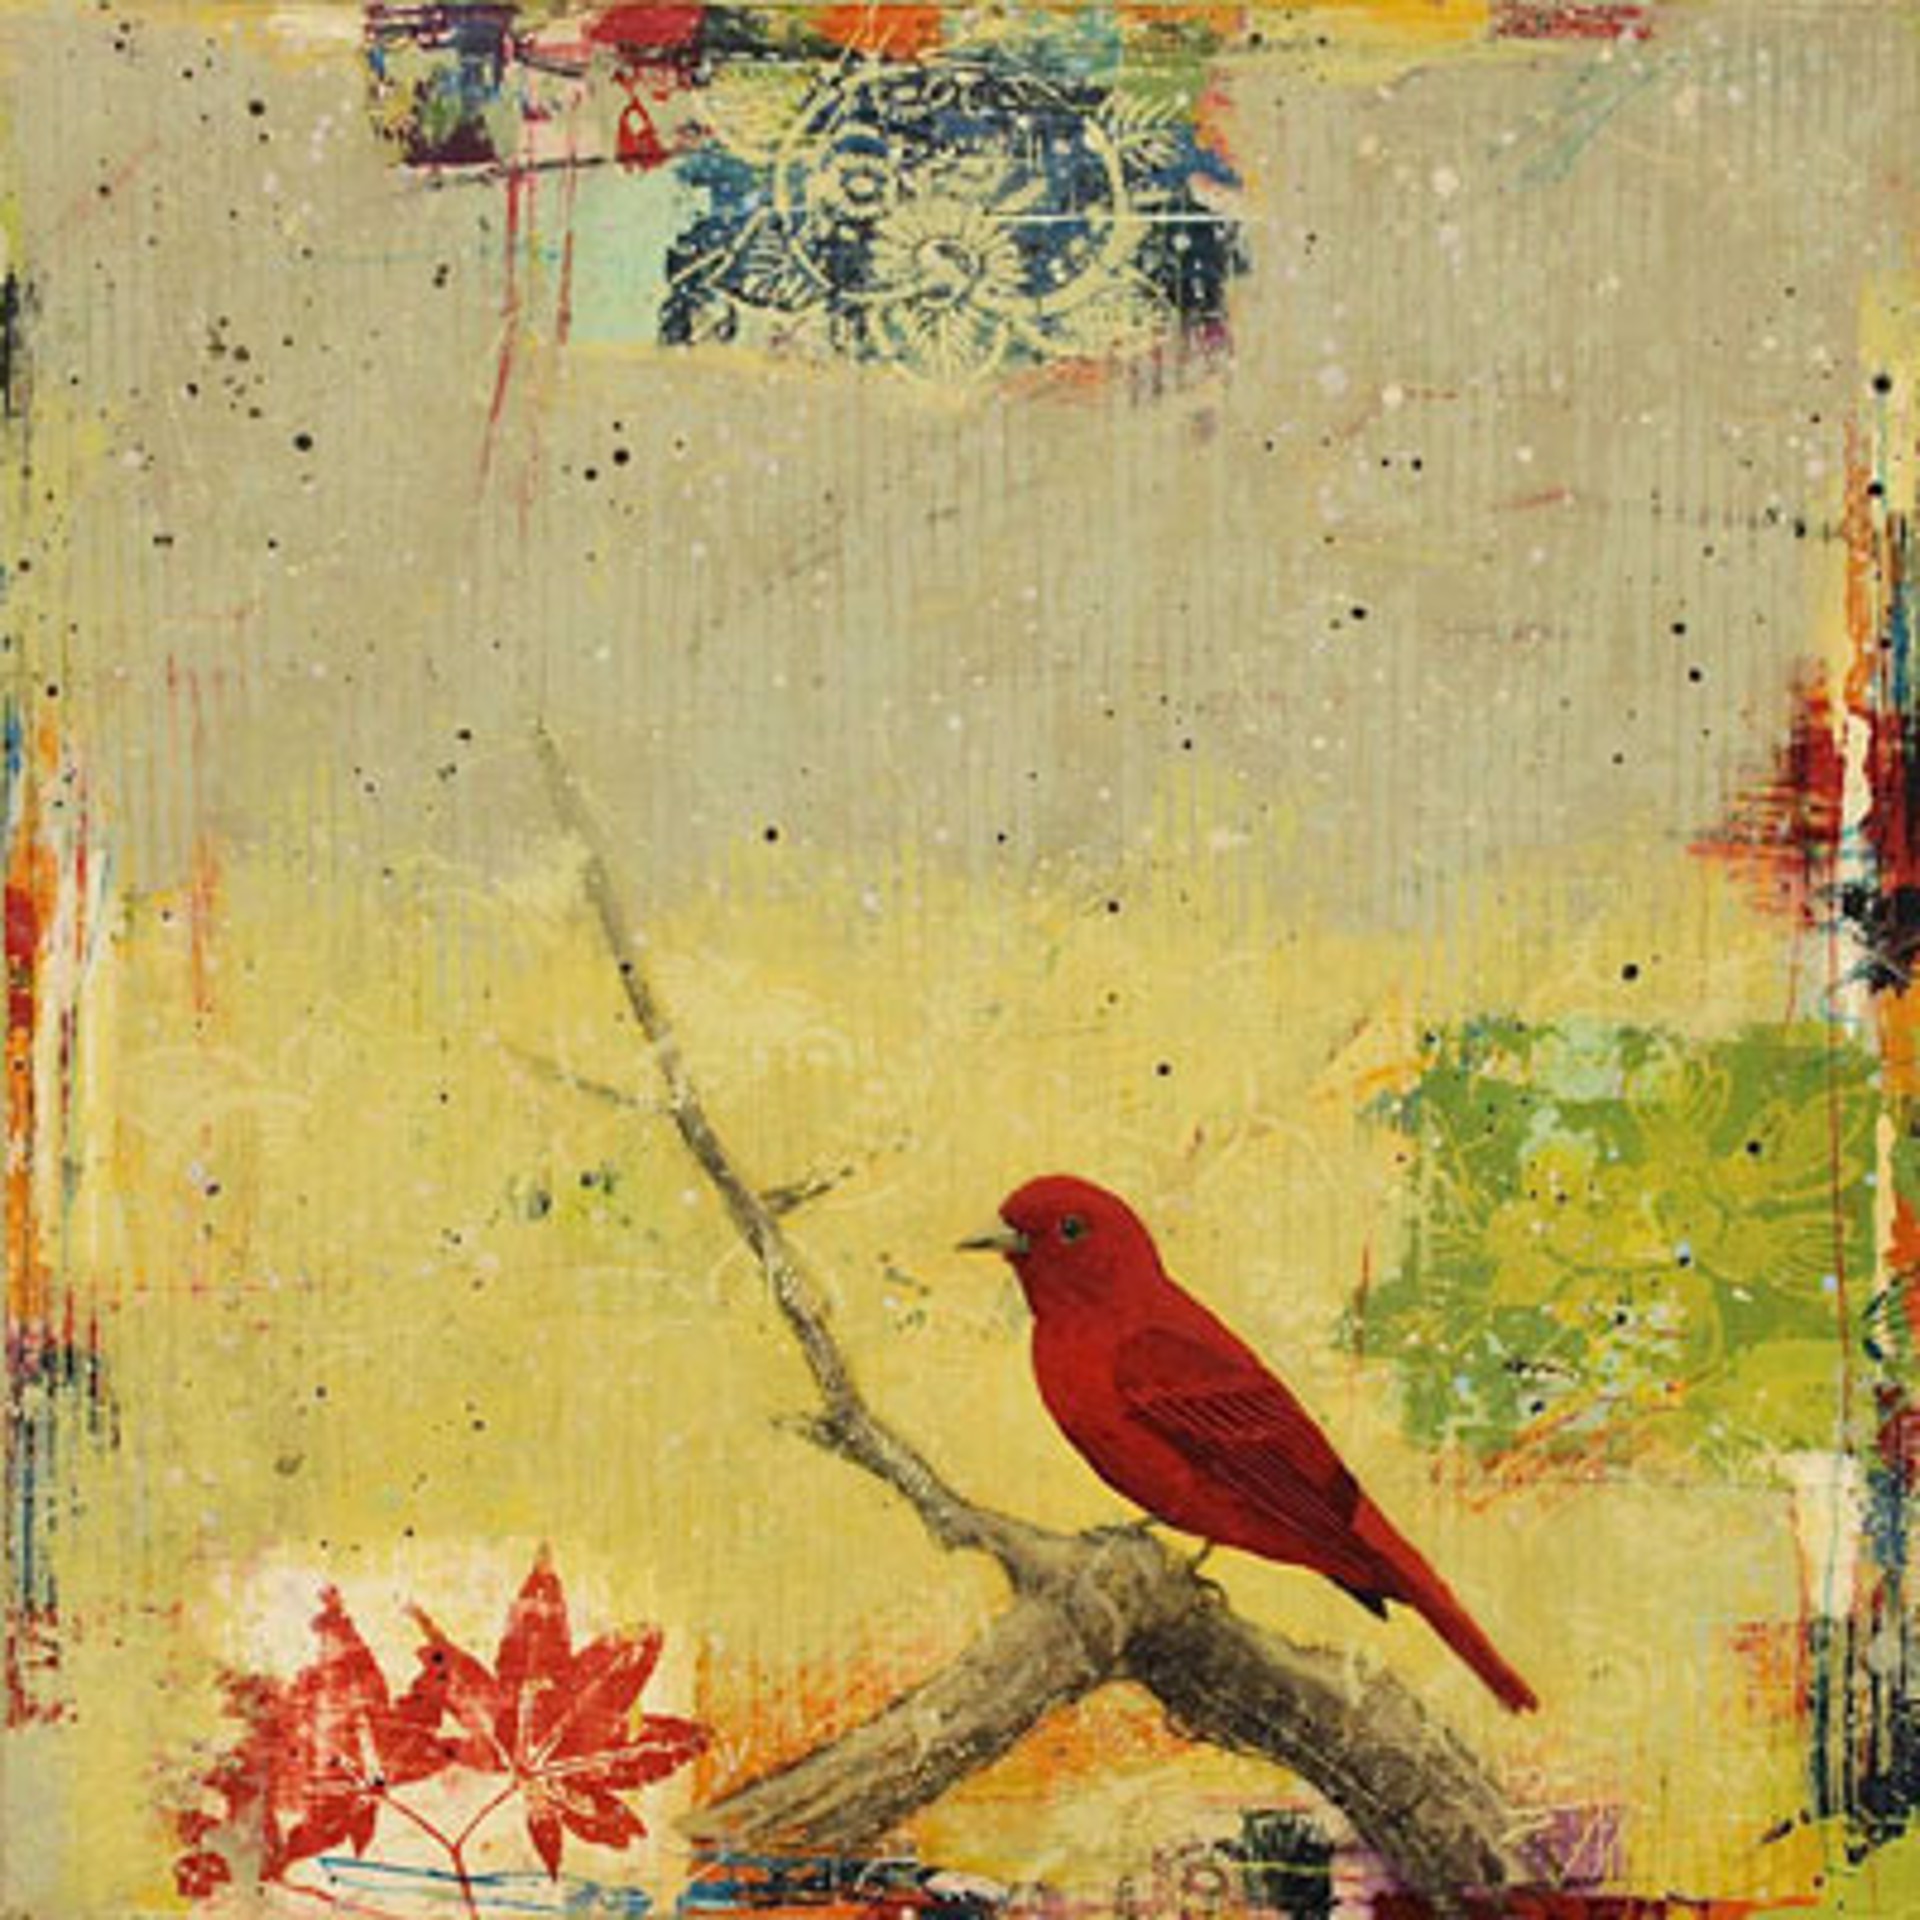 Summer Tanagers #2 by Paul Brigham